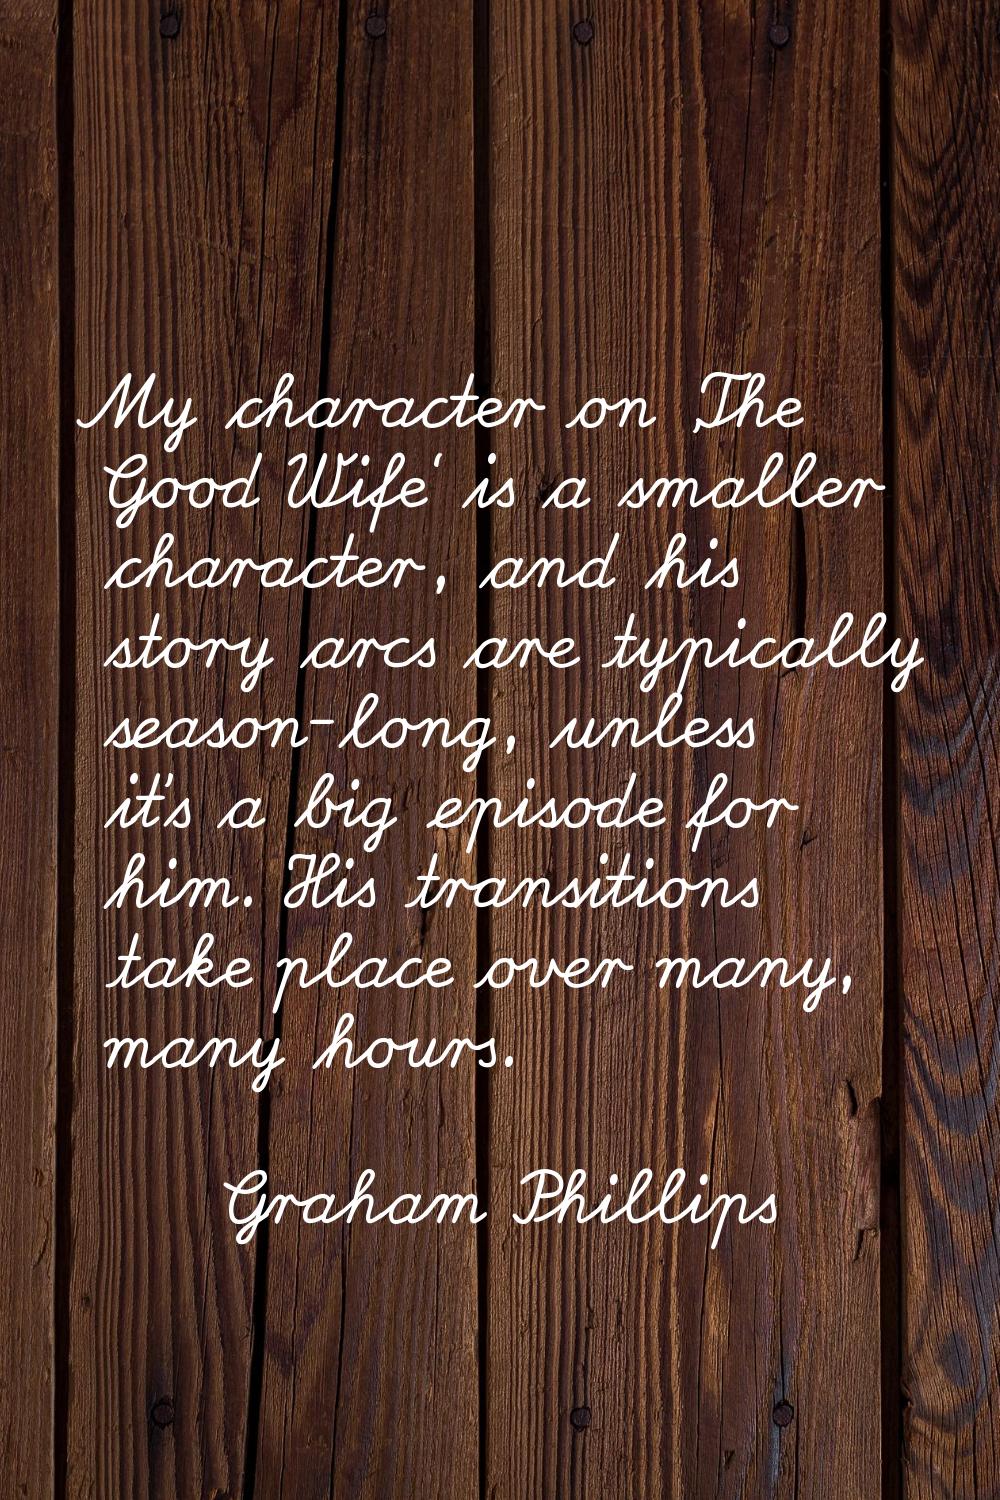 My character on 'The Good Wife' is a smaller character, and his story arcs are typically season-lon